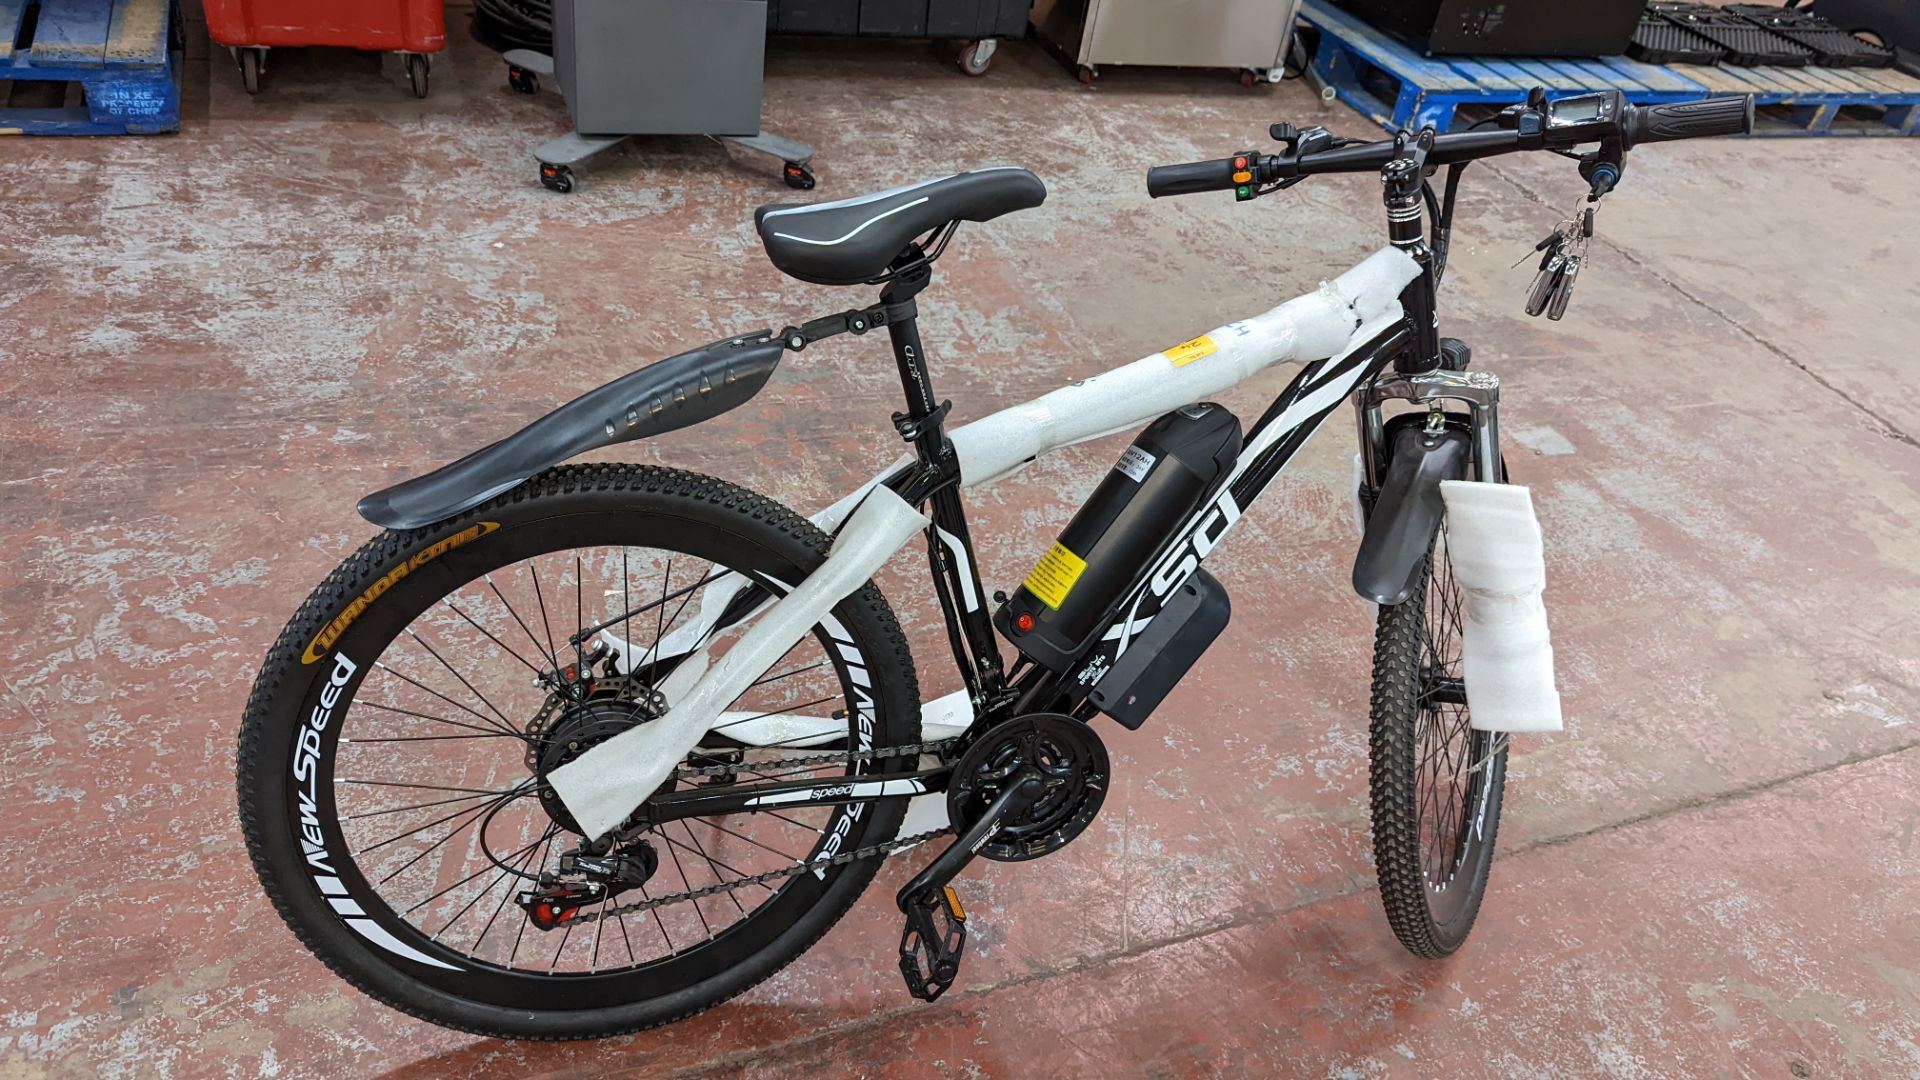 XSD FTX Sport MTB 7.5 Racing electric bike with Shimano Tourney TZ gears. Includes 36v 12AH battery, - Image 9 of 19